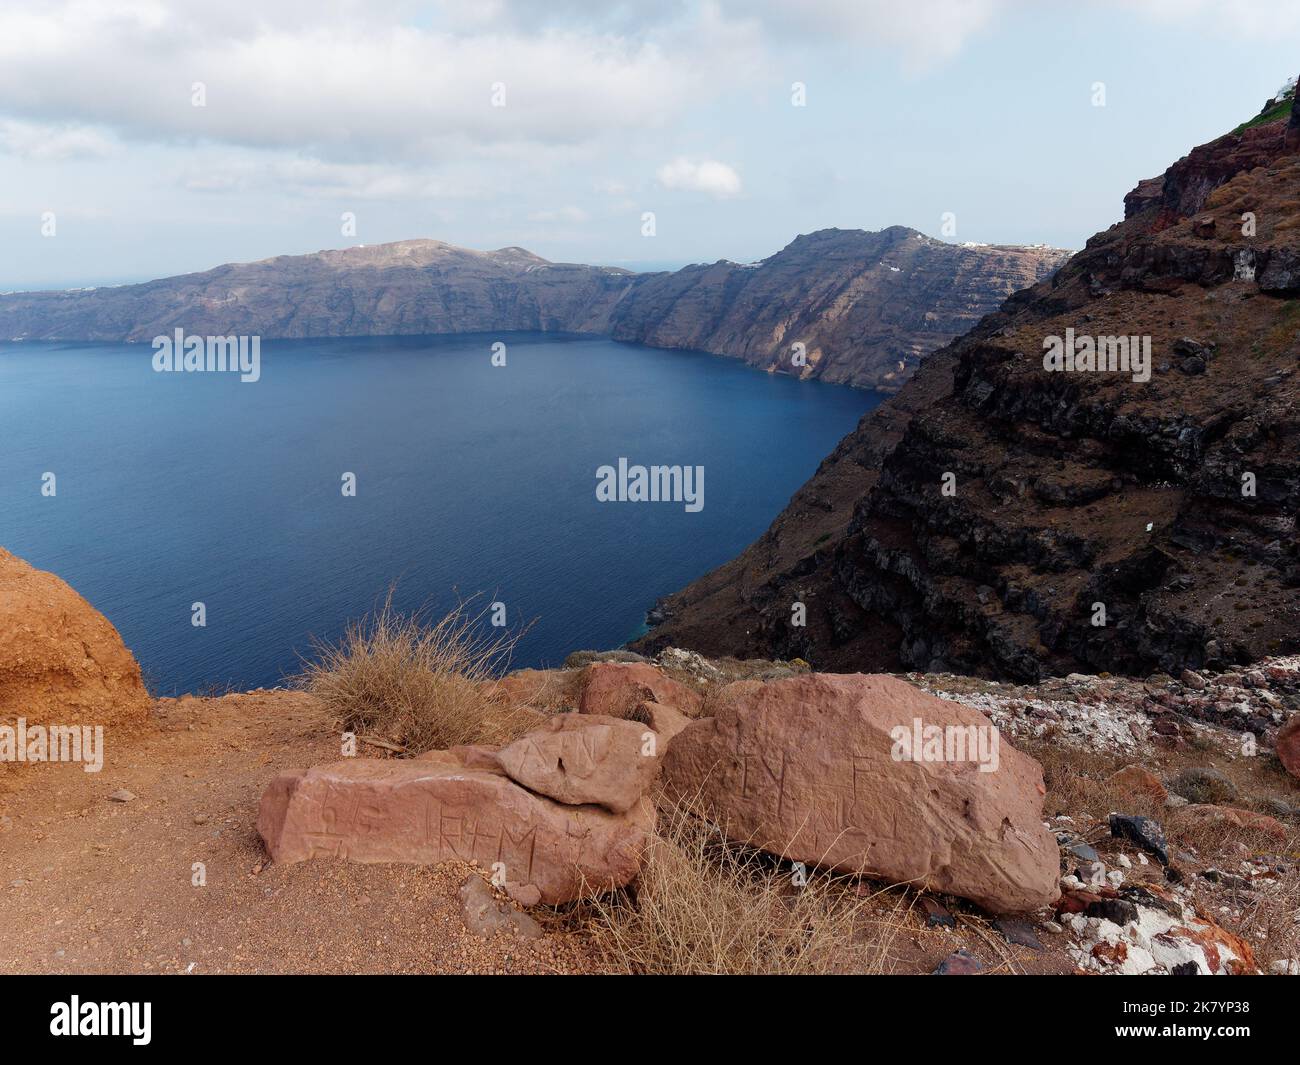 View from Skaros Rock over the Caldera. Greek Cyclades island of Santorini in the Aegean Sea. Stock Photo